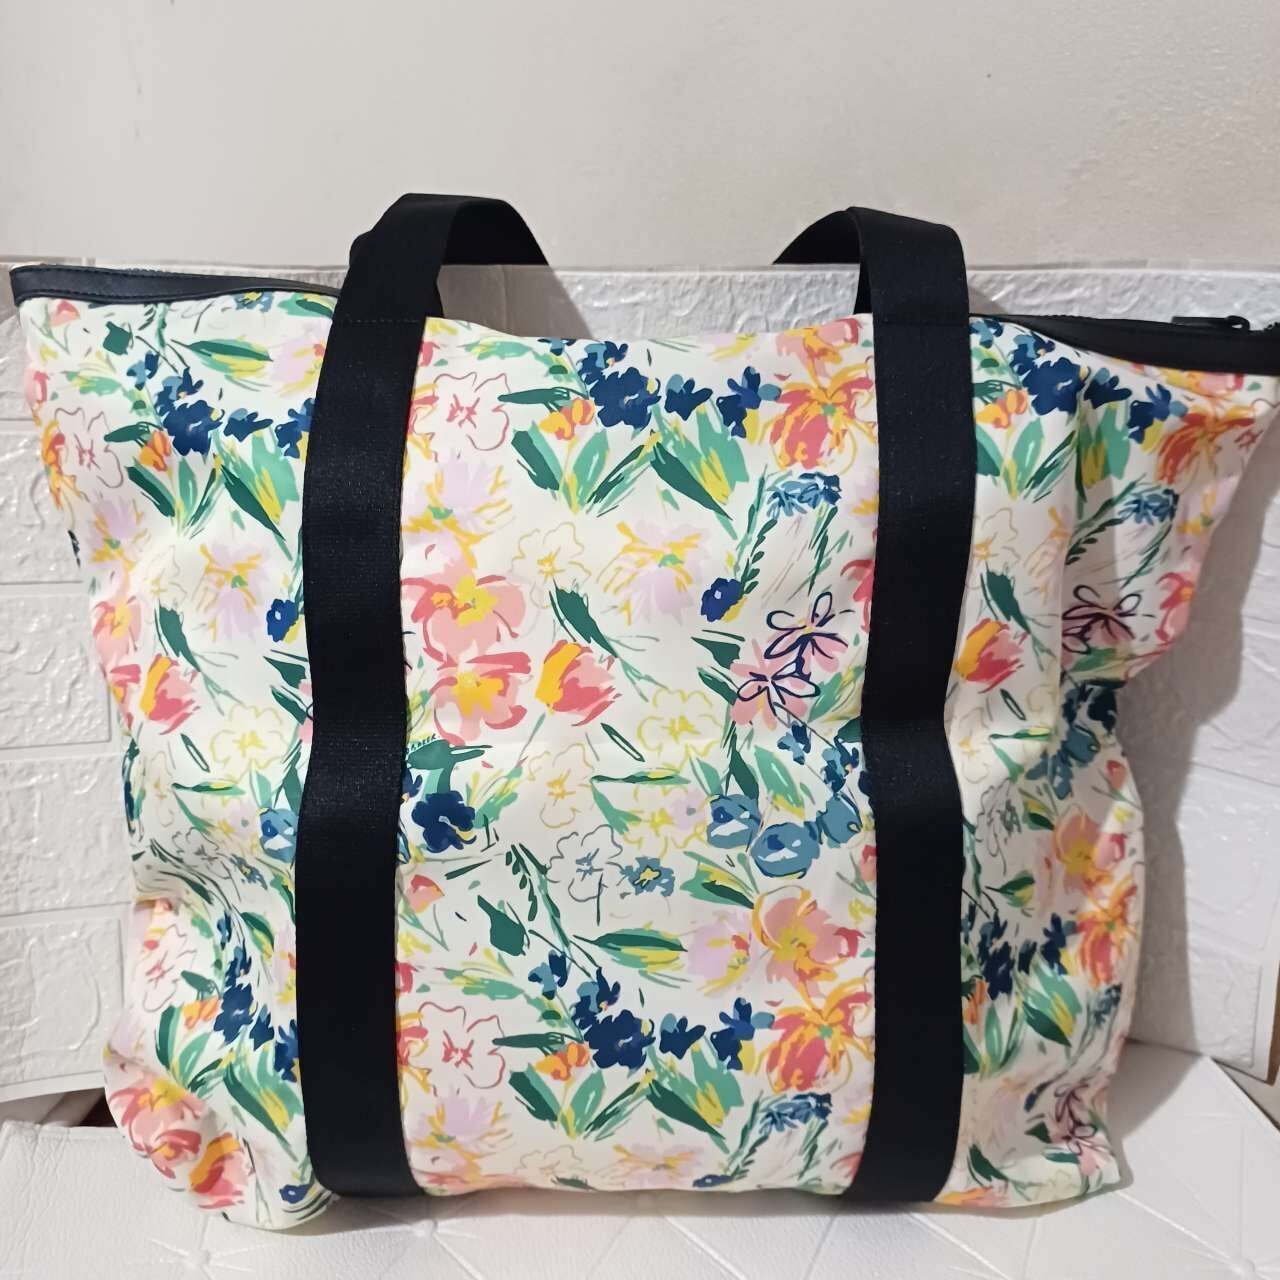 Ted Baker Multicolour Floral Tote Bag